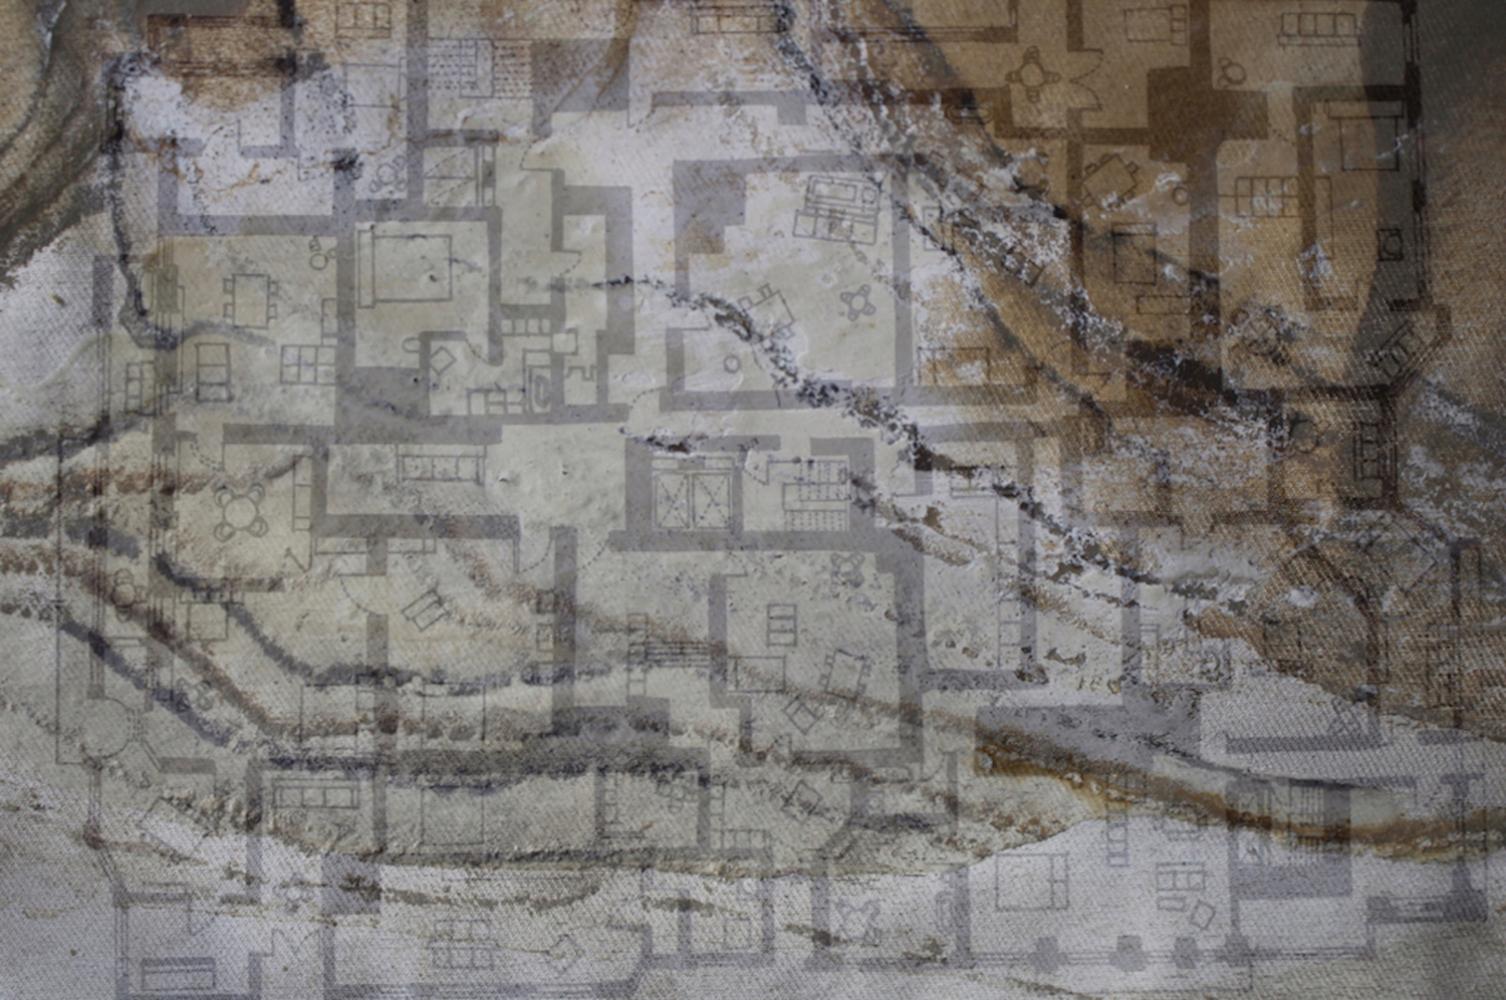 'Complexity of Layers' (earth pigments on canvas). Floor plan drawn on chalk, clay and sand collected from under London